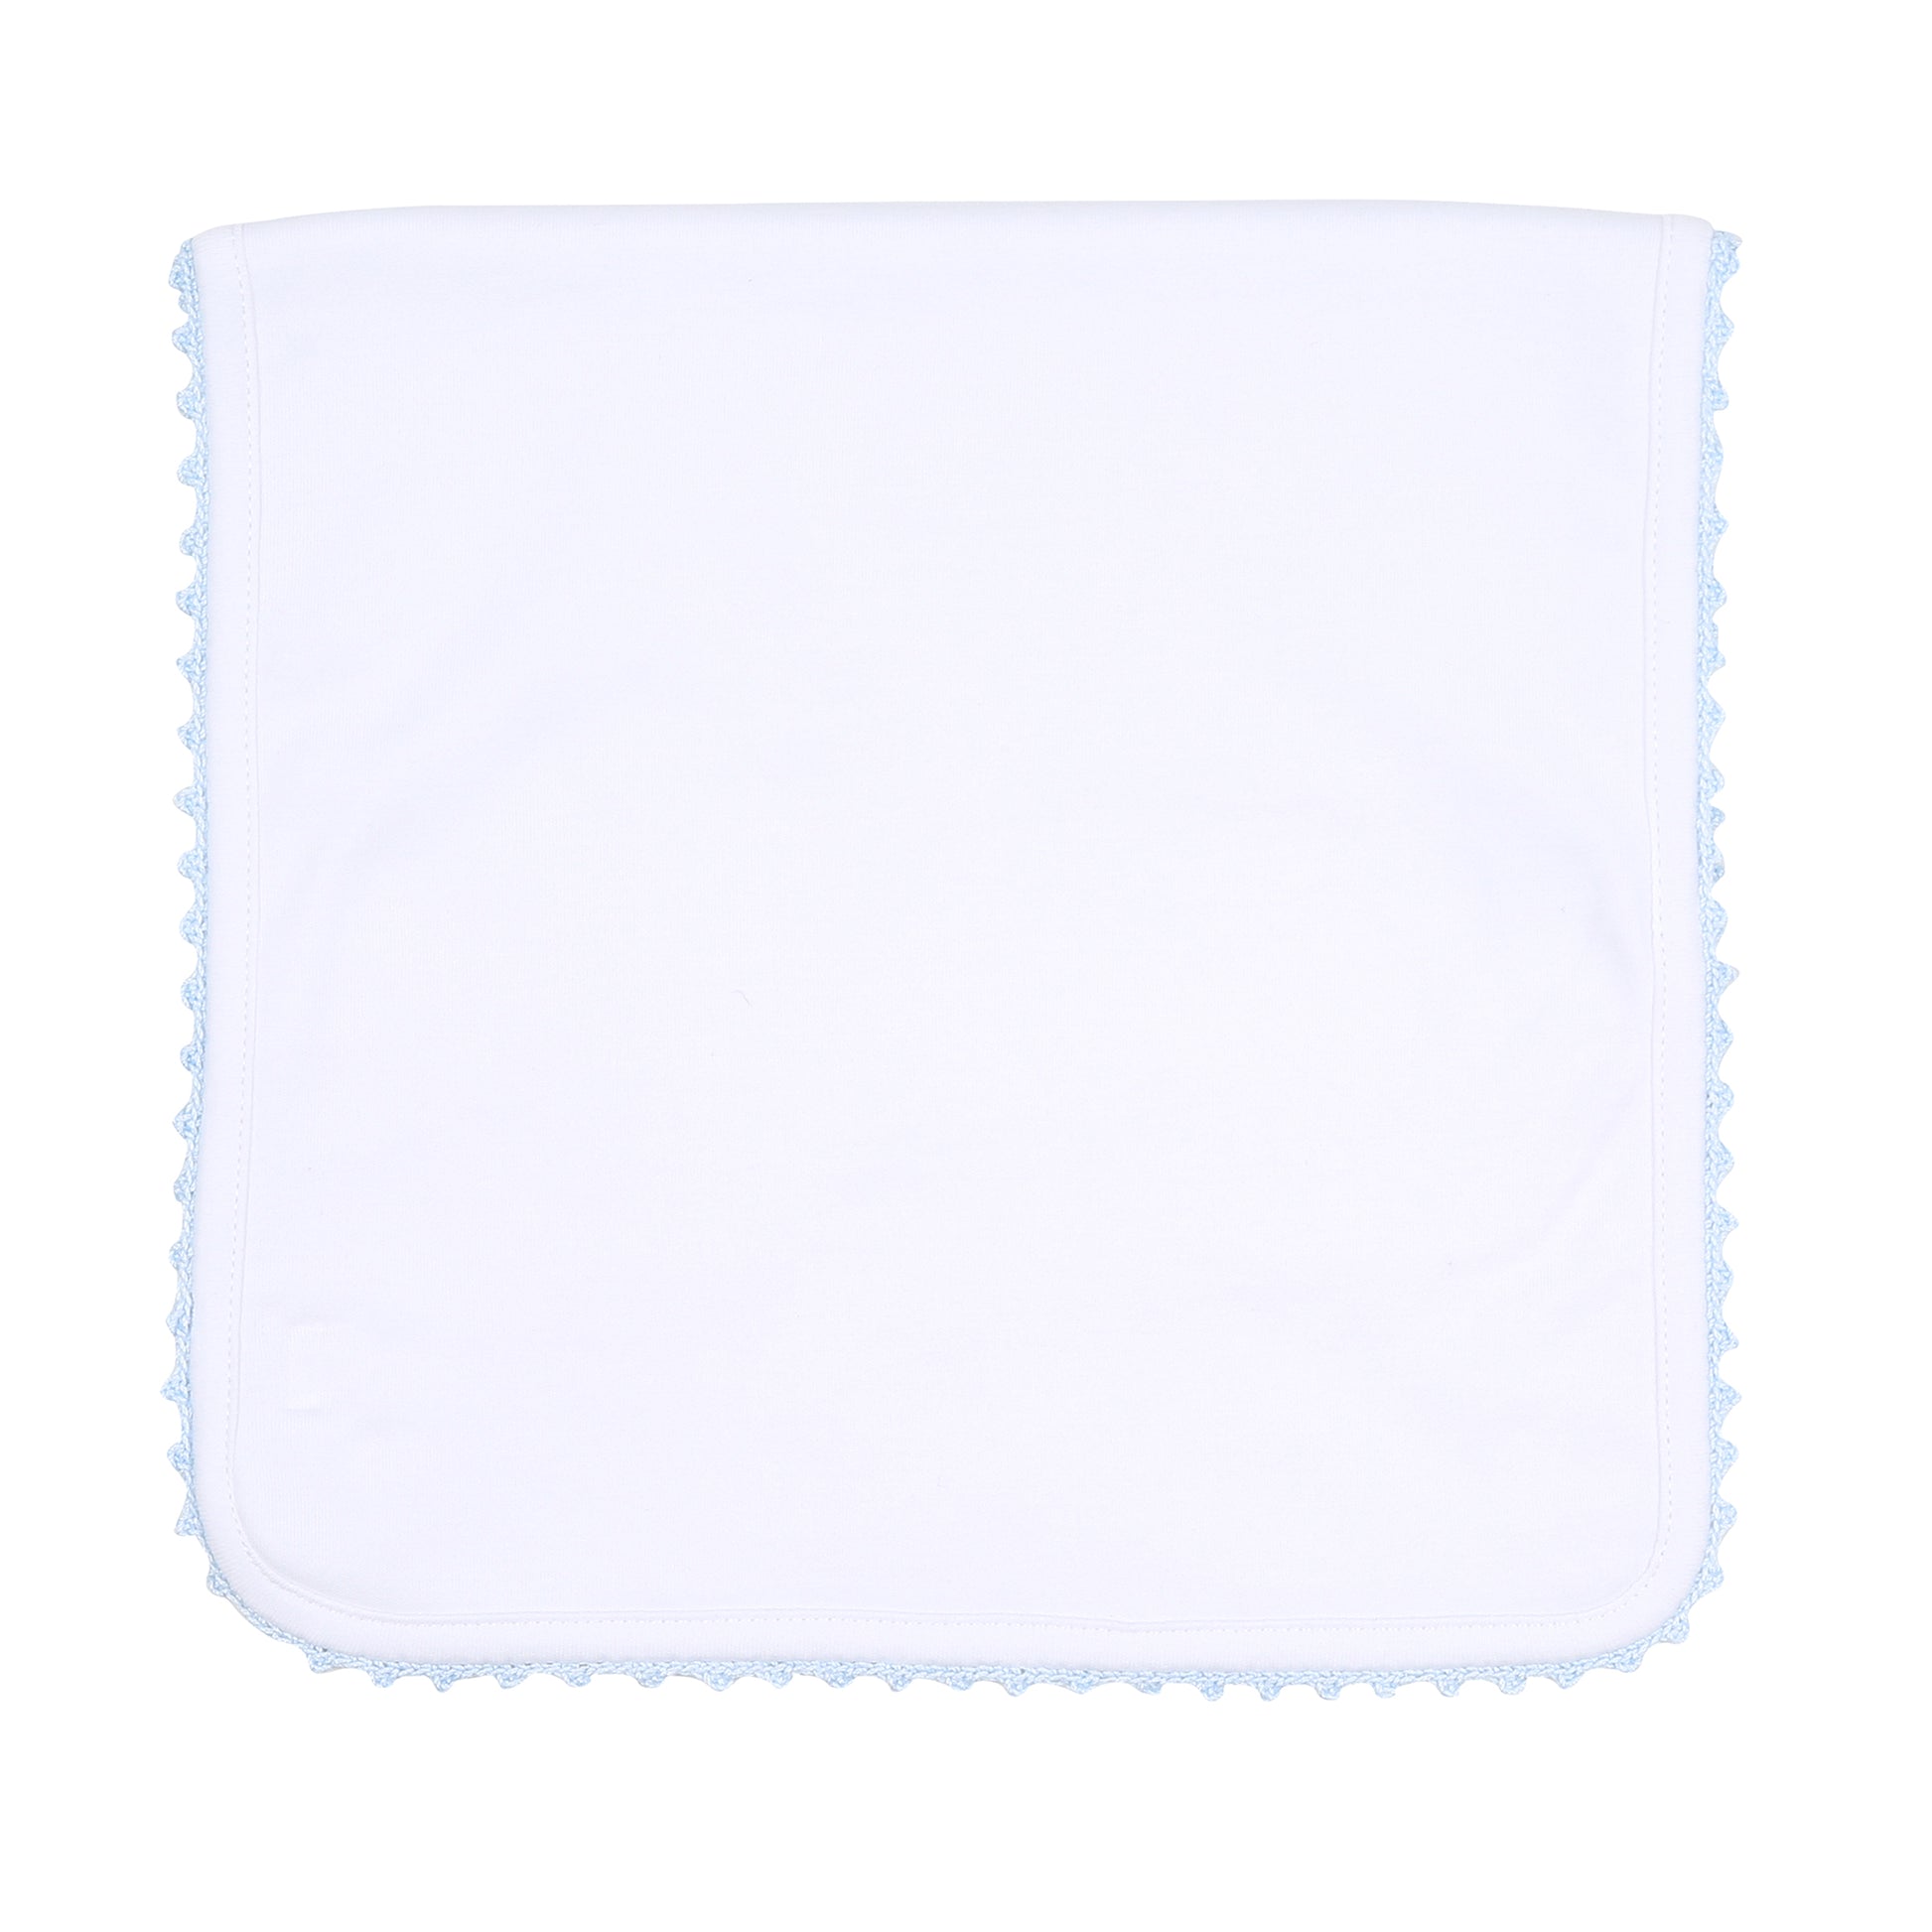 Blue Baby Joy Embroidered Burp Cloth made by Magnolia Baby.